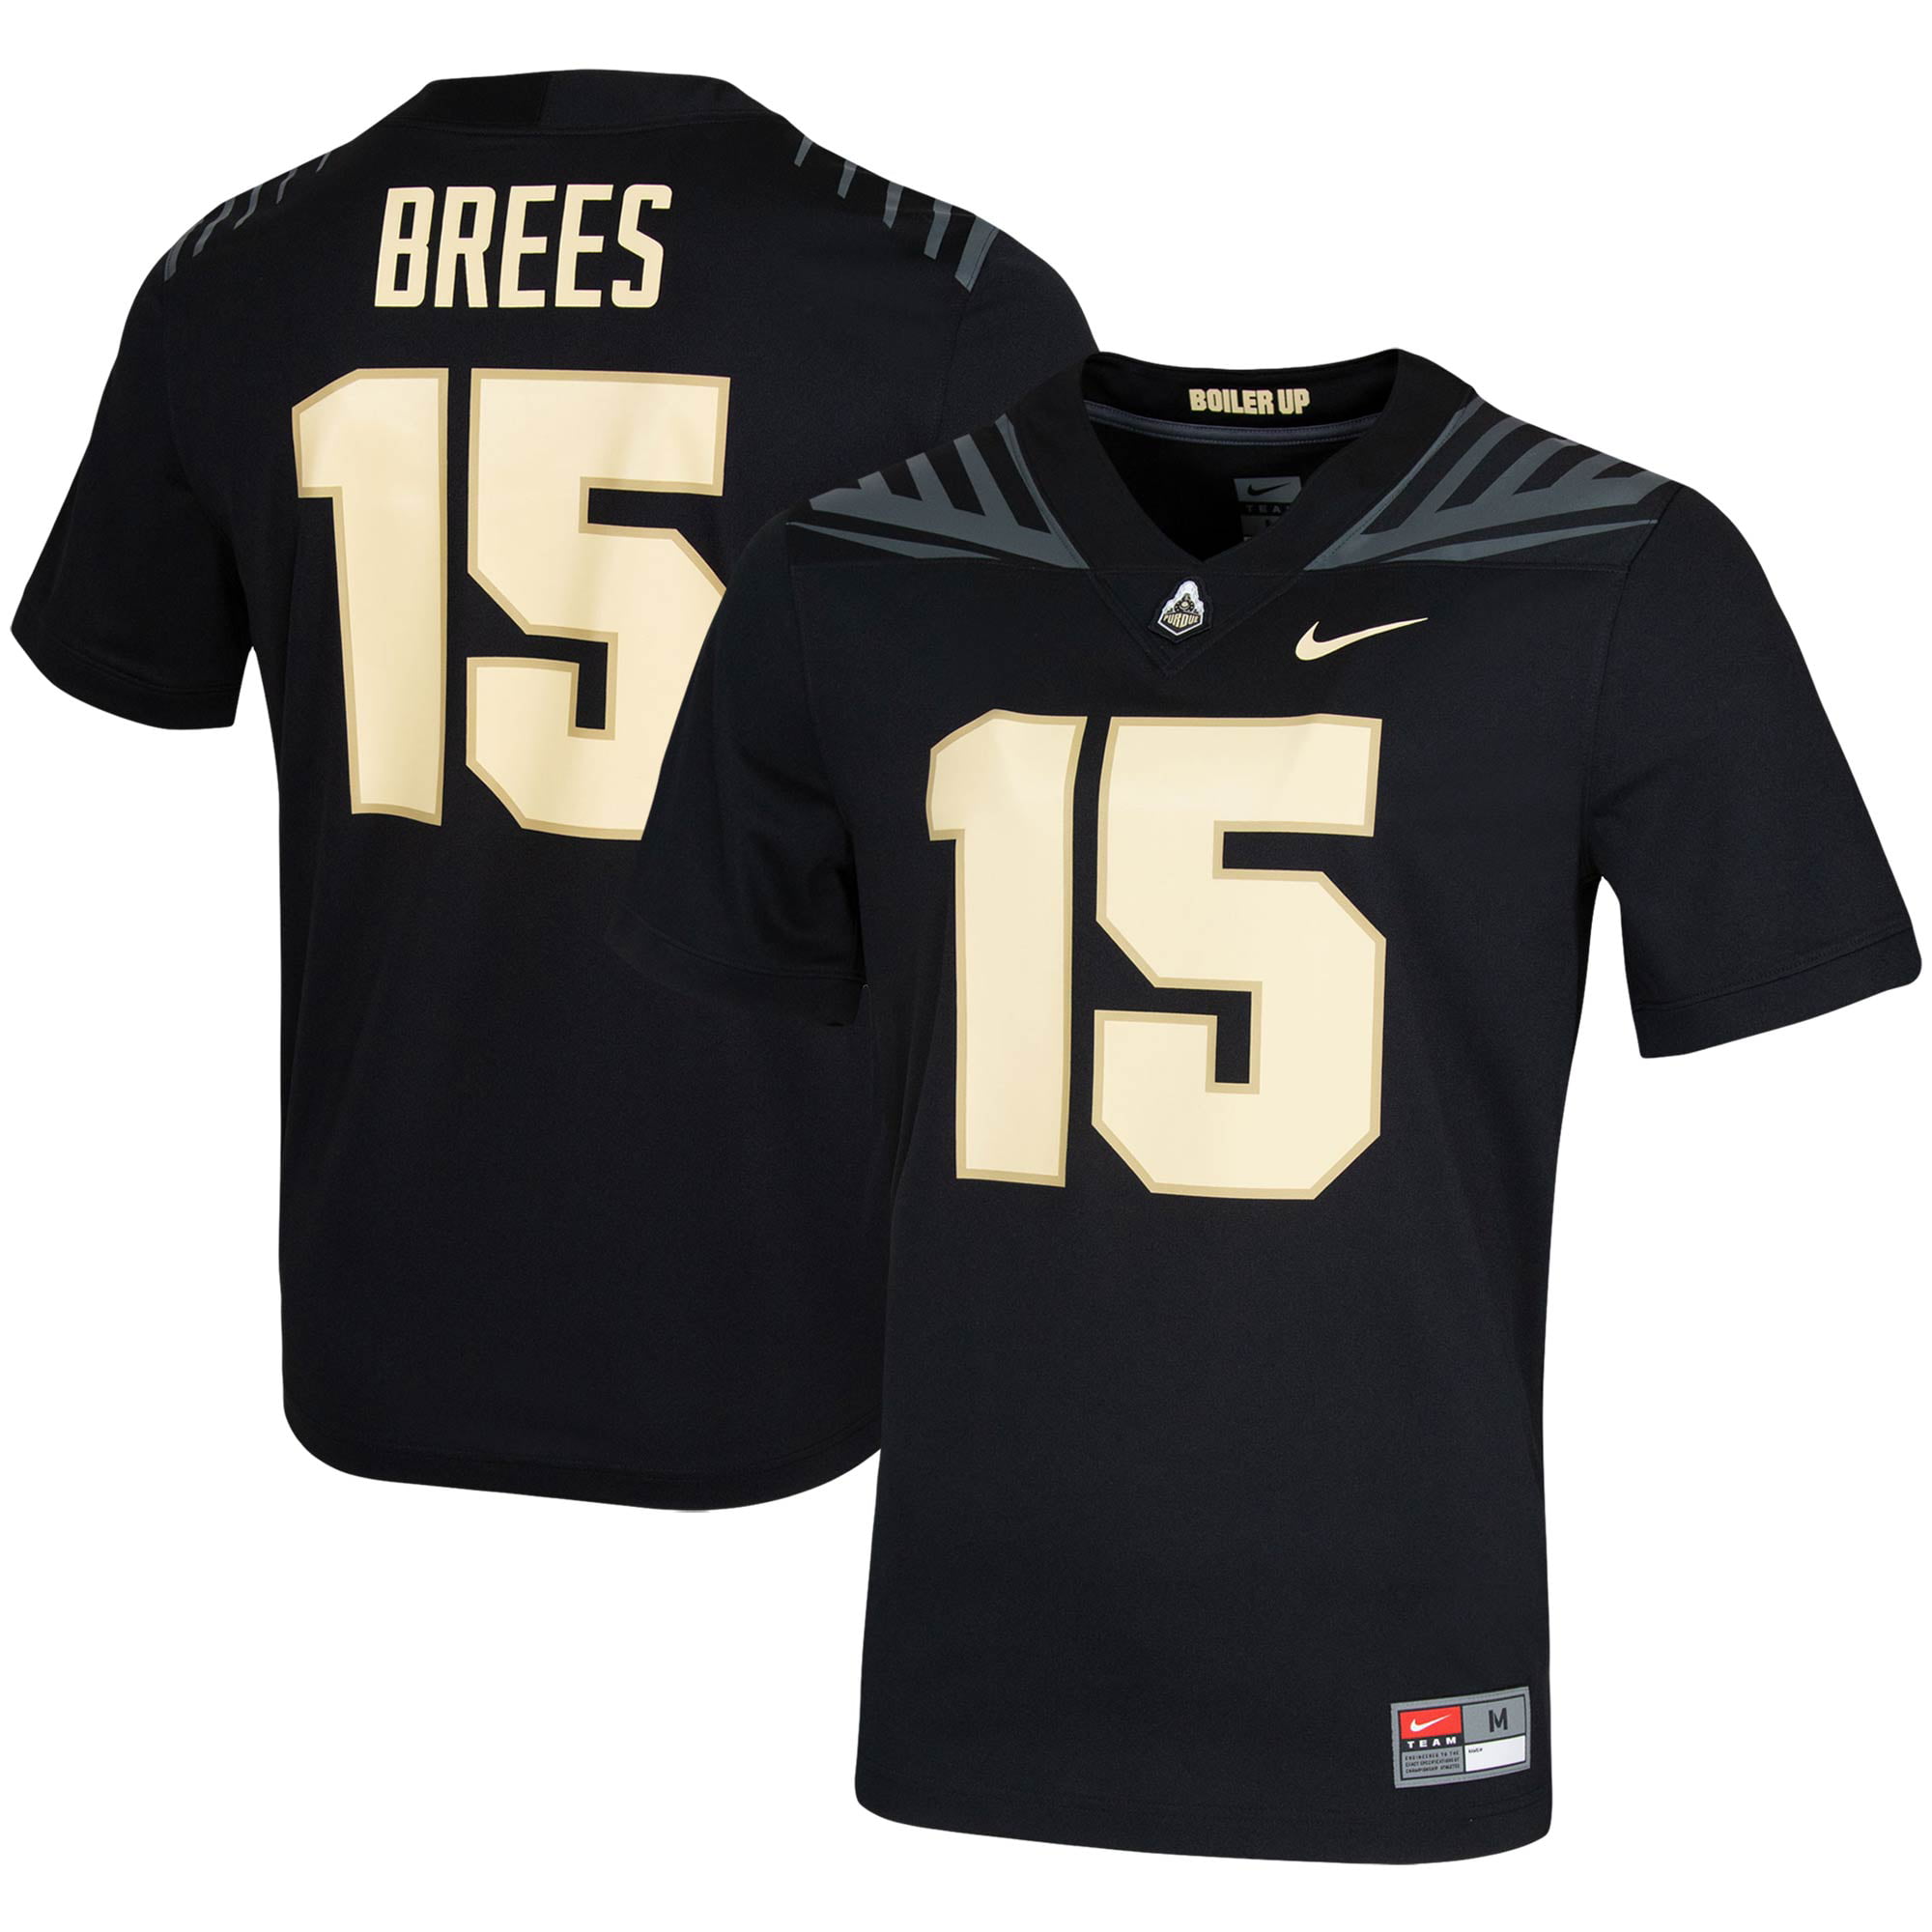 what is drew brees number on the jersey